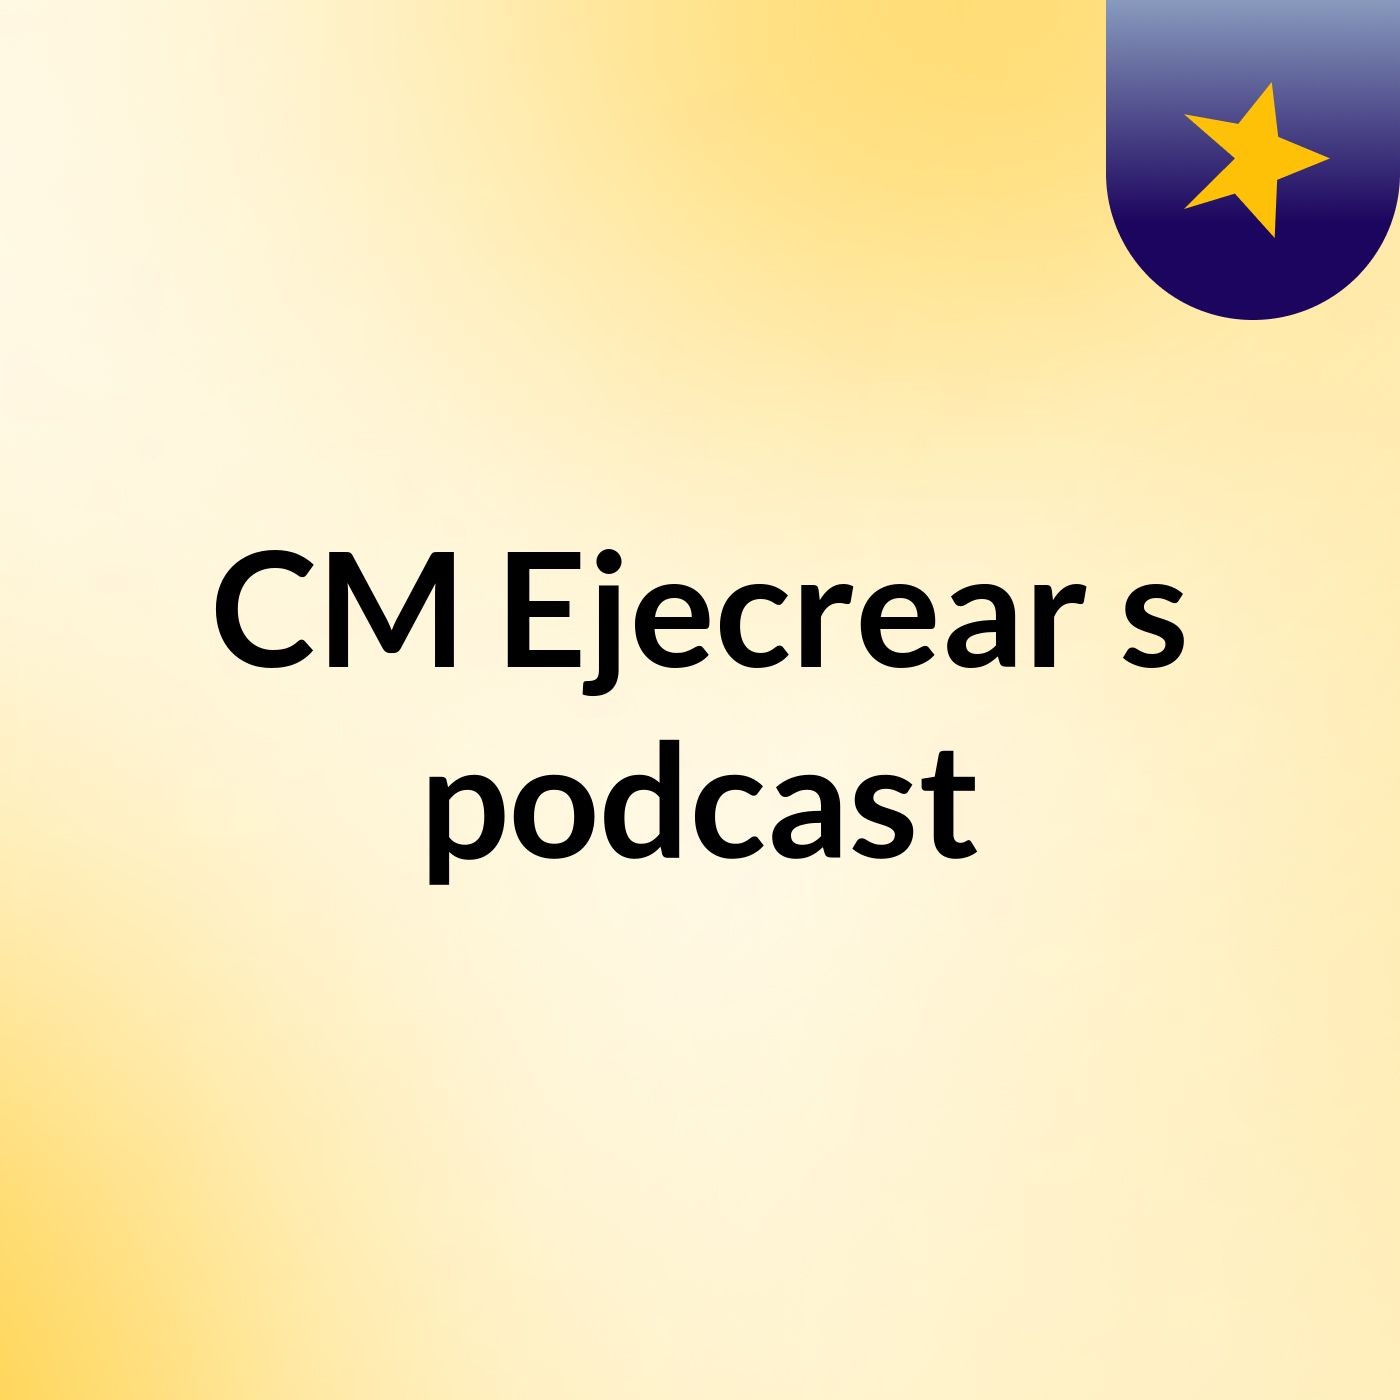 CM Ejecrear's podcast